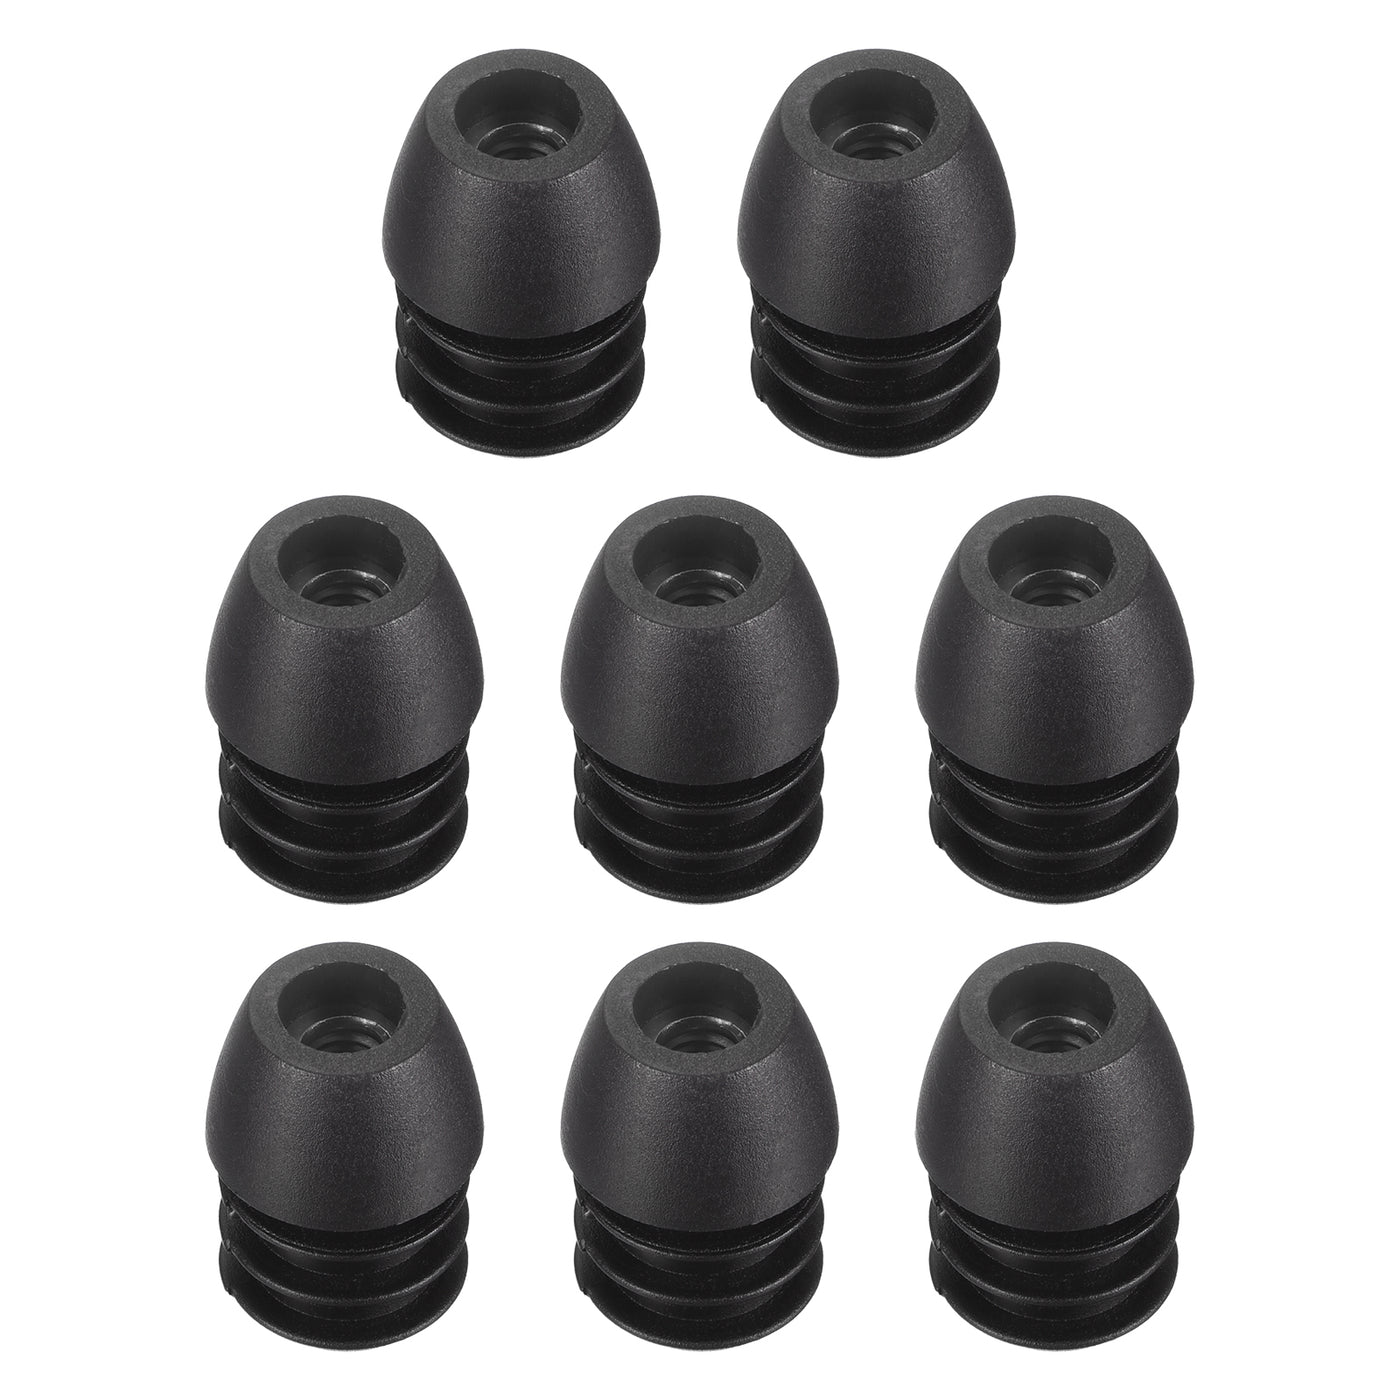 uxcell Uxcell 8Pcs 19mm/0.75" Caster Insert with Thread, M6 Thread for Furniture